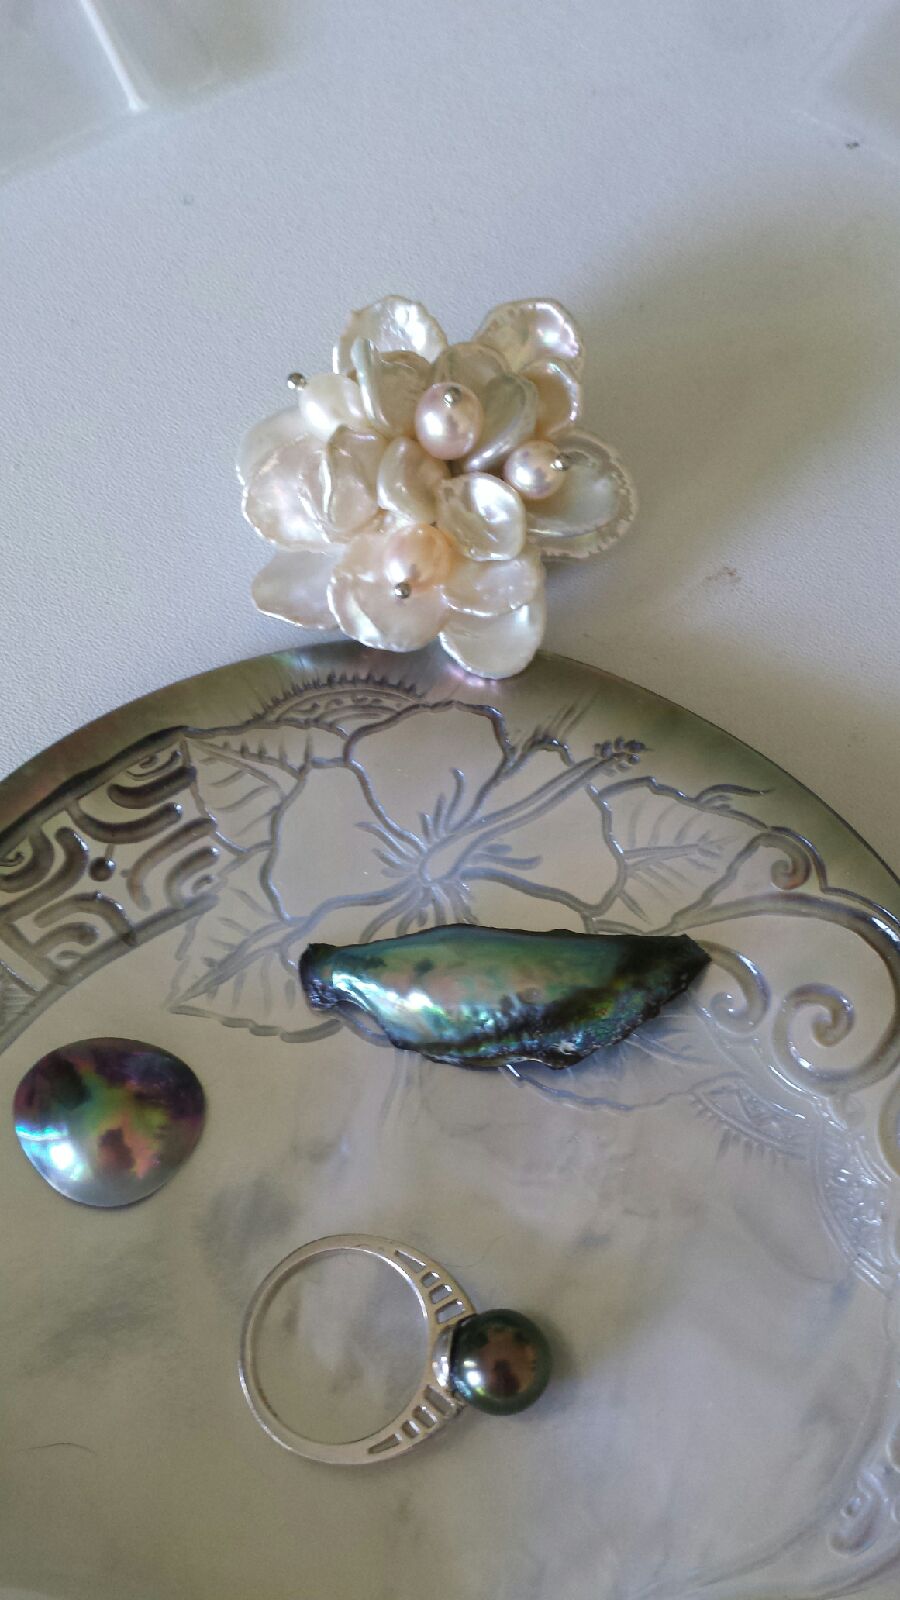 A ring from Kamoka and the shell, Sea of Cortez mabe and abalone pearl from Douglas, flower brooch from Kojima